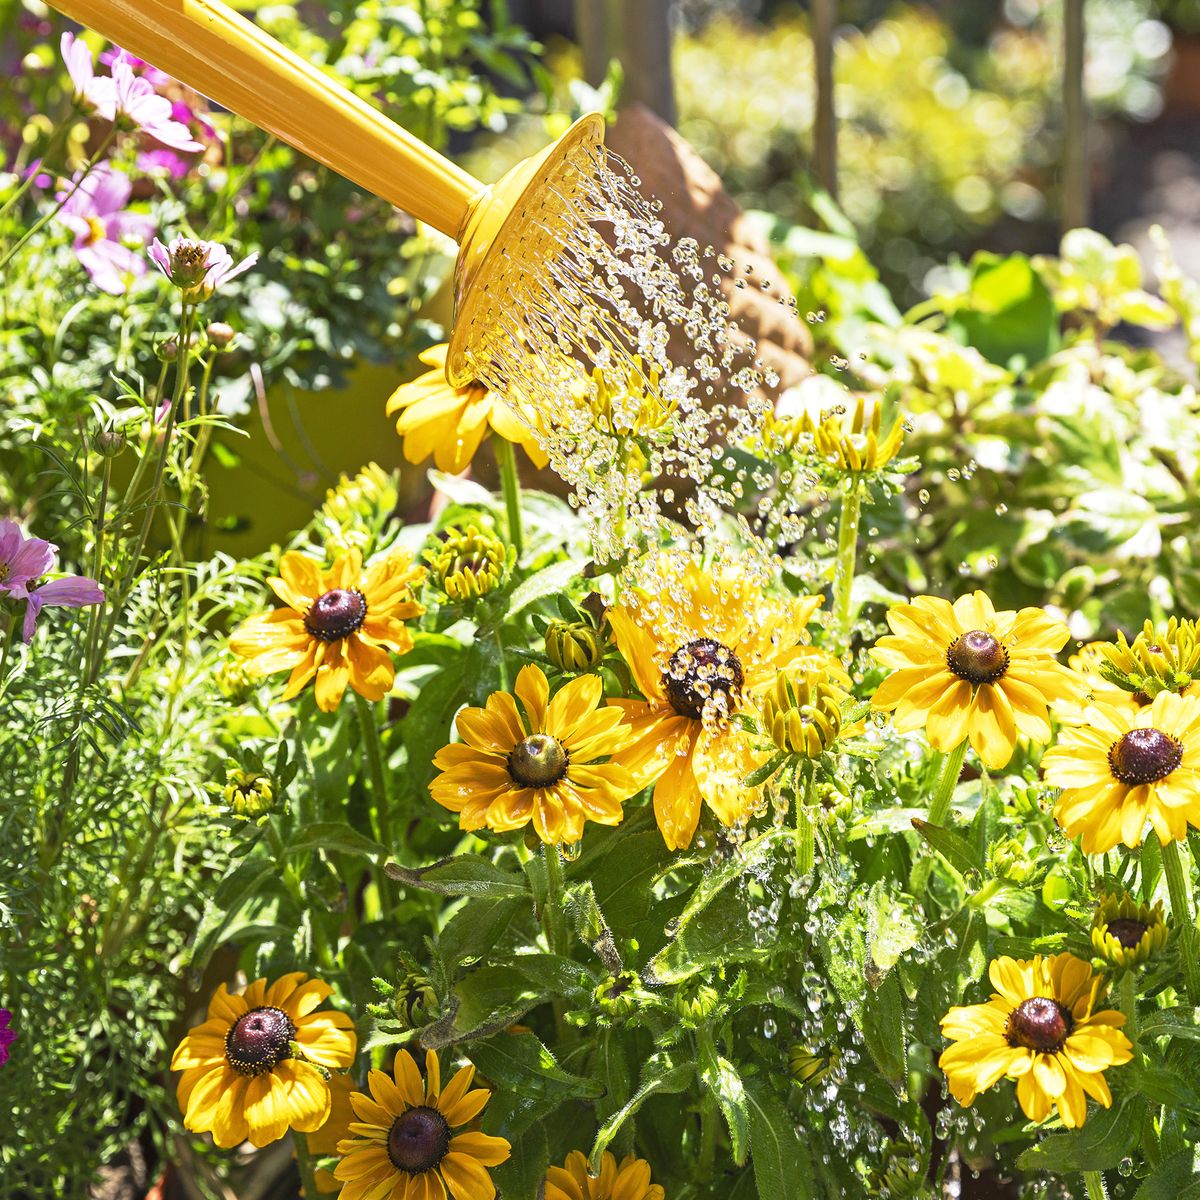 7 Garden Watering Mistakes That Harm Plants And Waste Water | Gardening ...